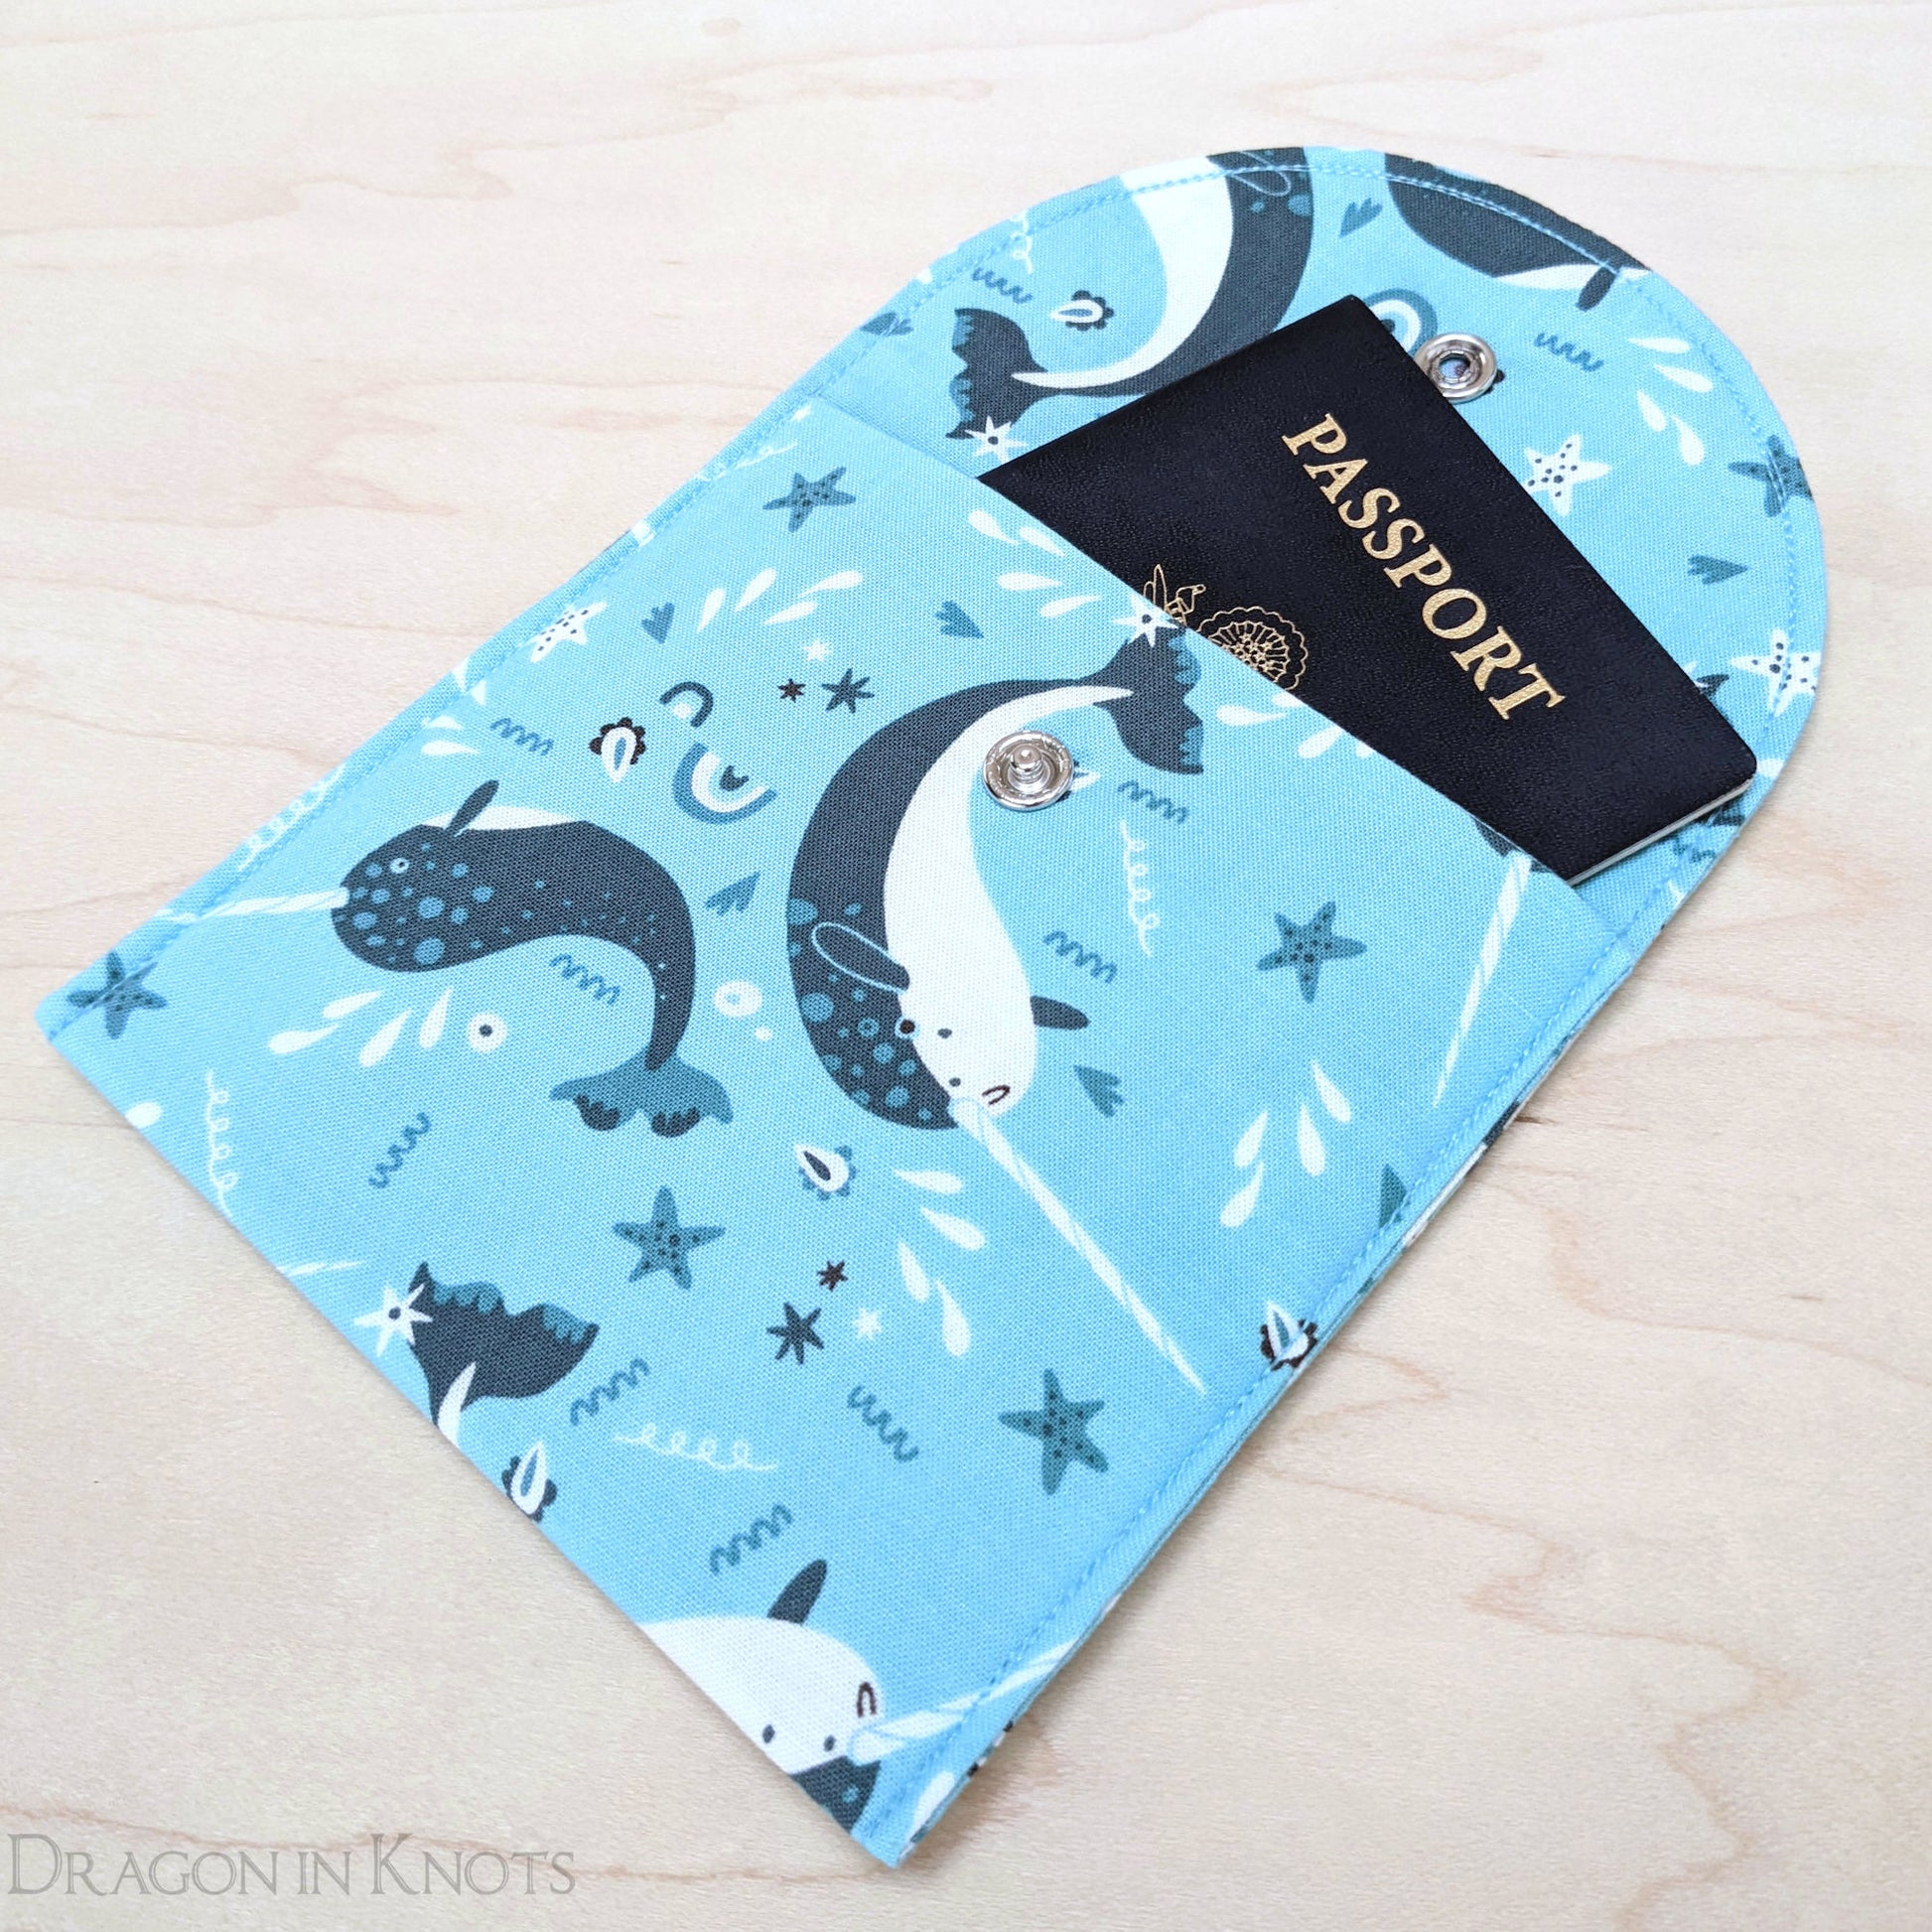 Narwhal 5" Accessory Pouch - Dragon in Knots handmade